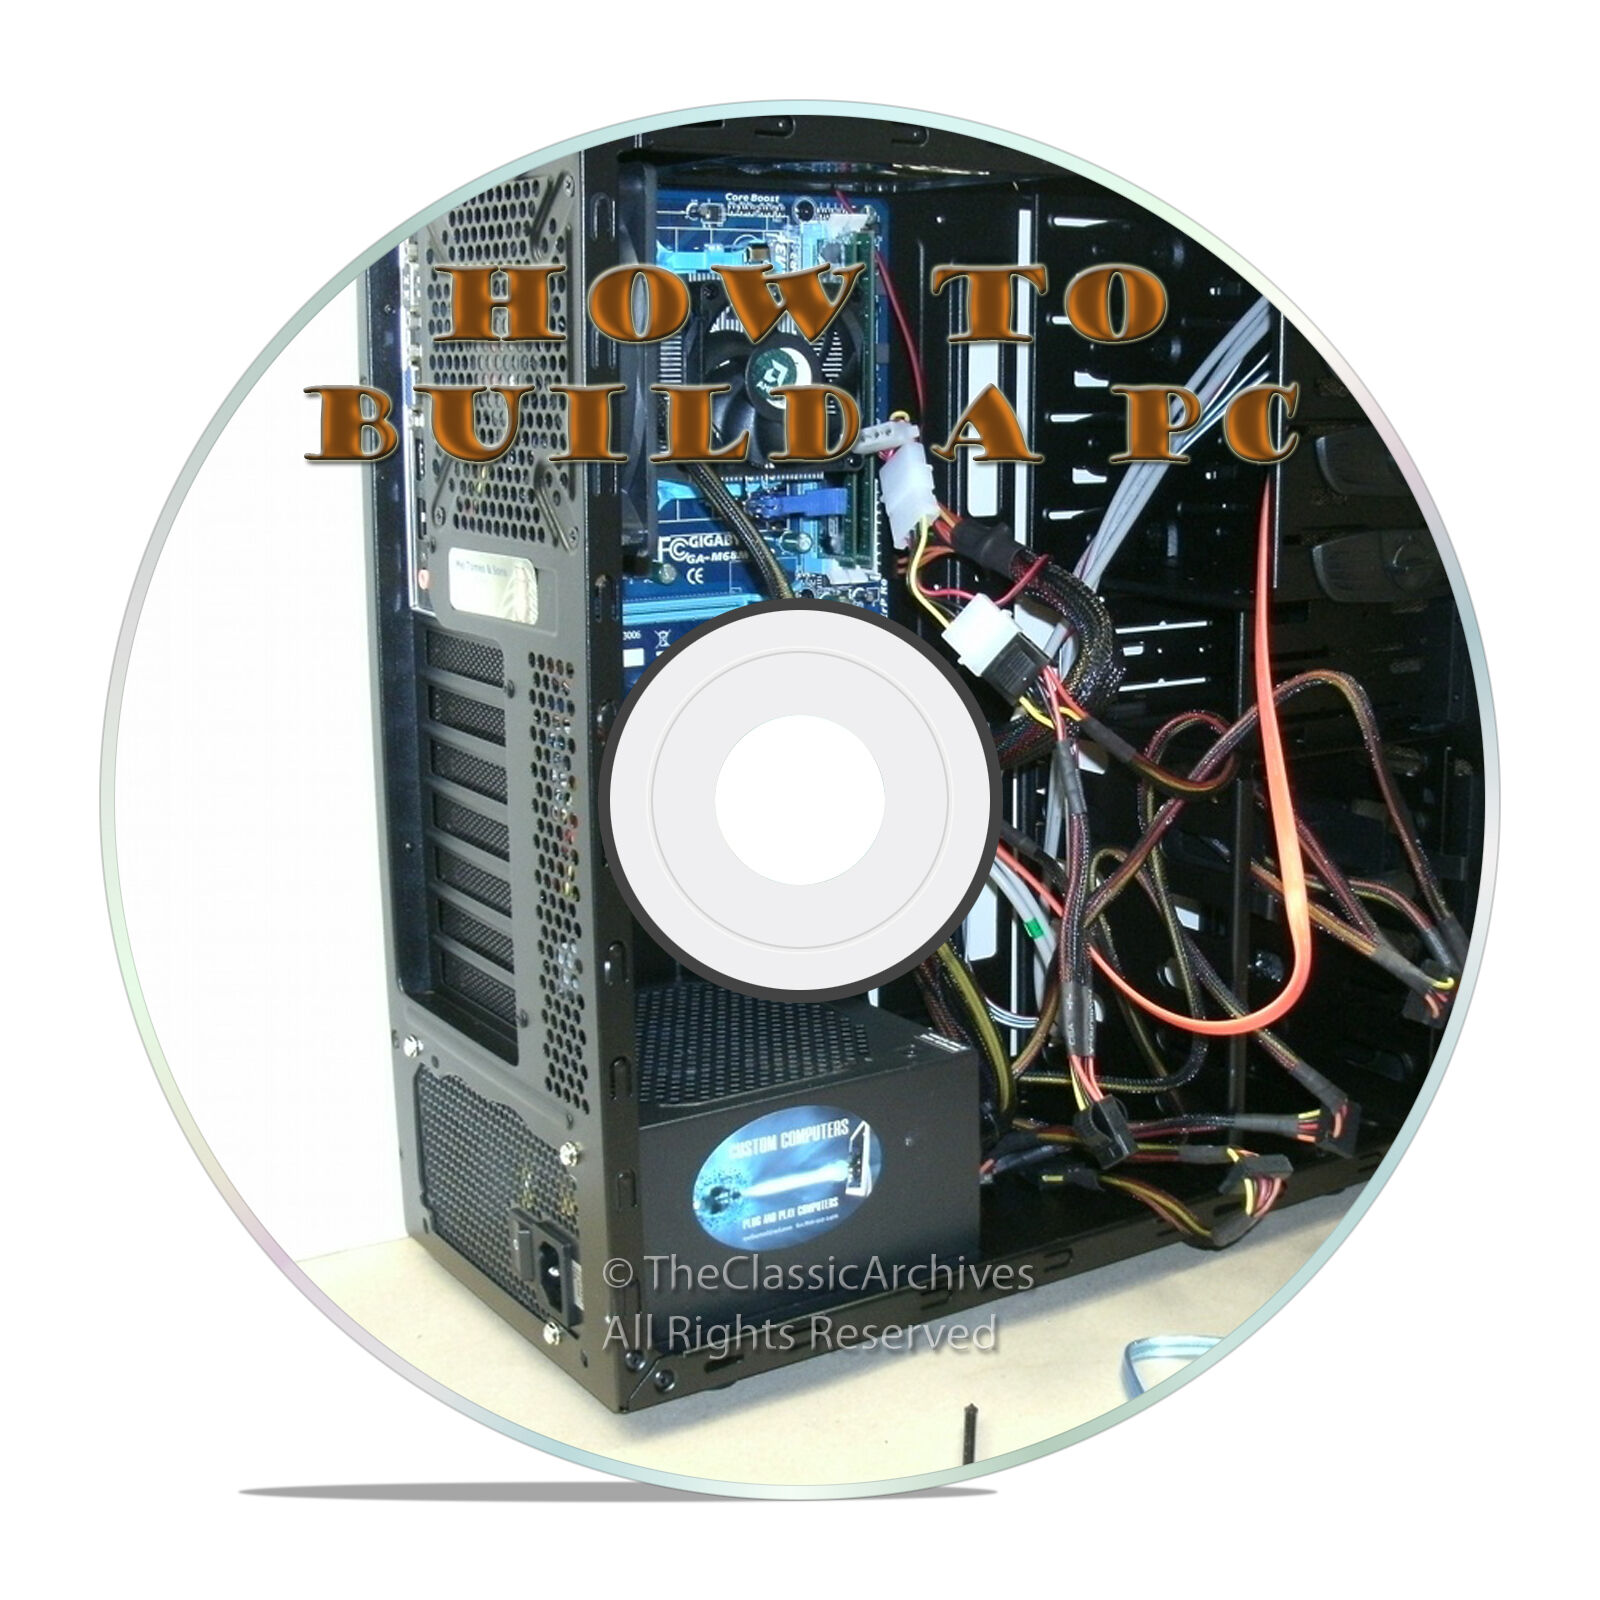 LEARN HOW TO BUILD A COMPUTER PC, WITH THIS STEP BY STEP GUIDE, BONUS SOFTWARE